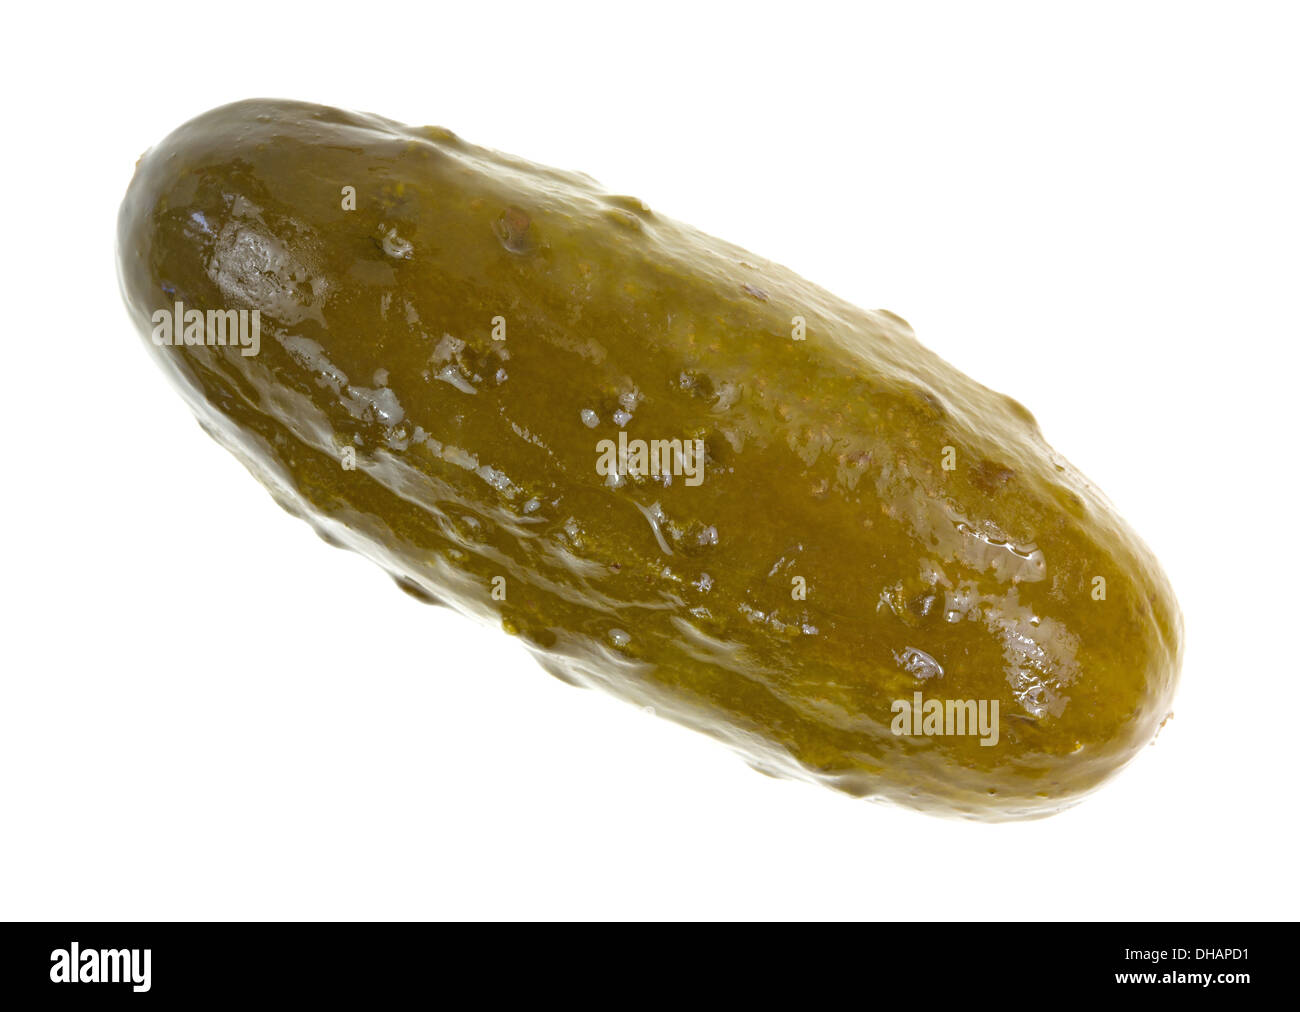 A single large dill pickle on a white background. Stock Photo